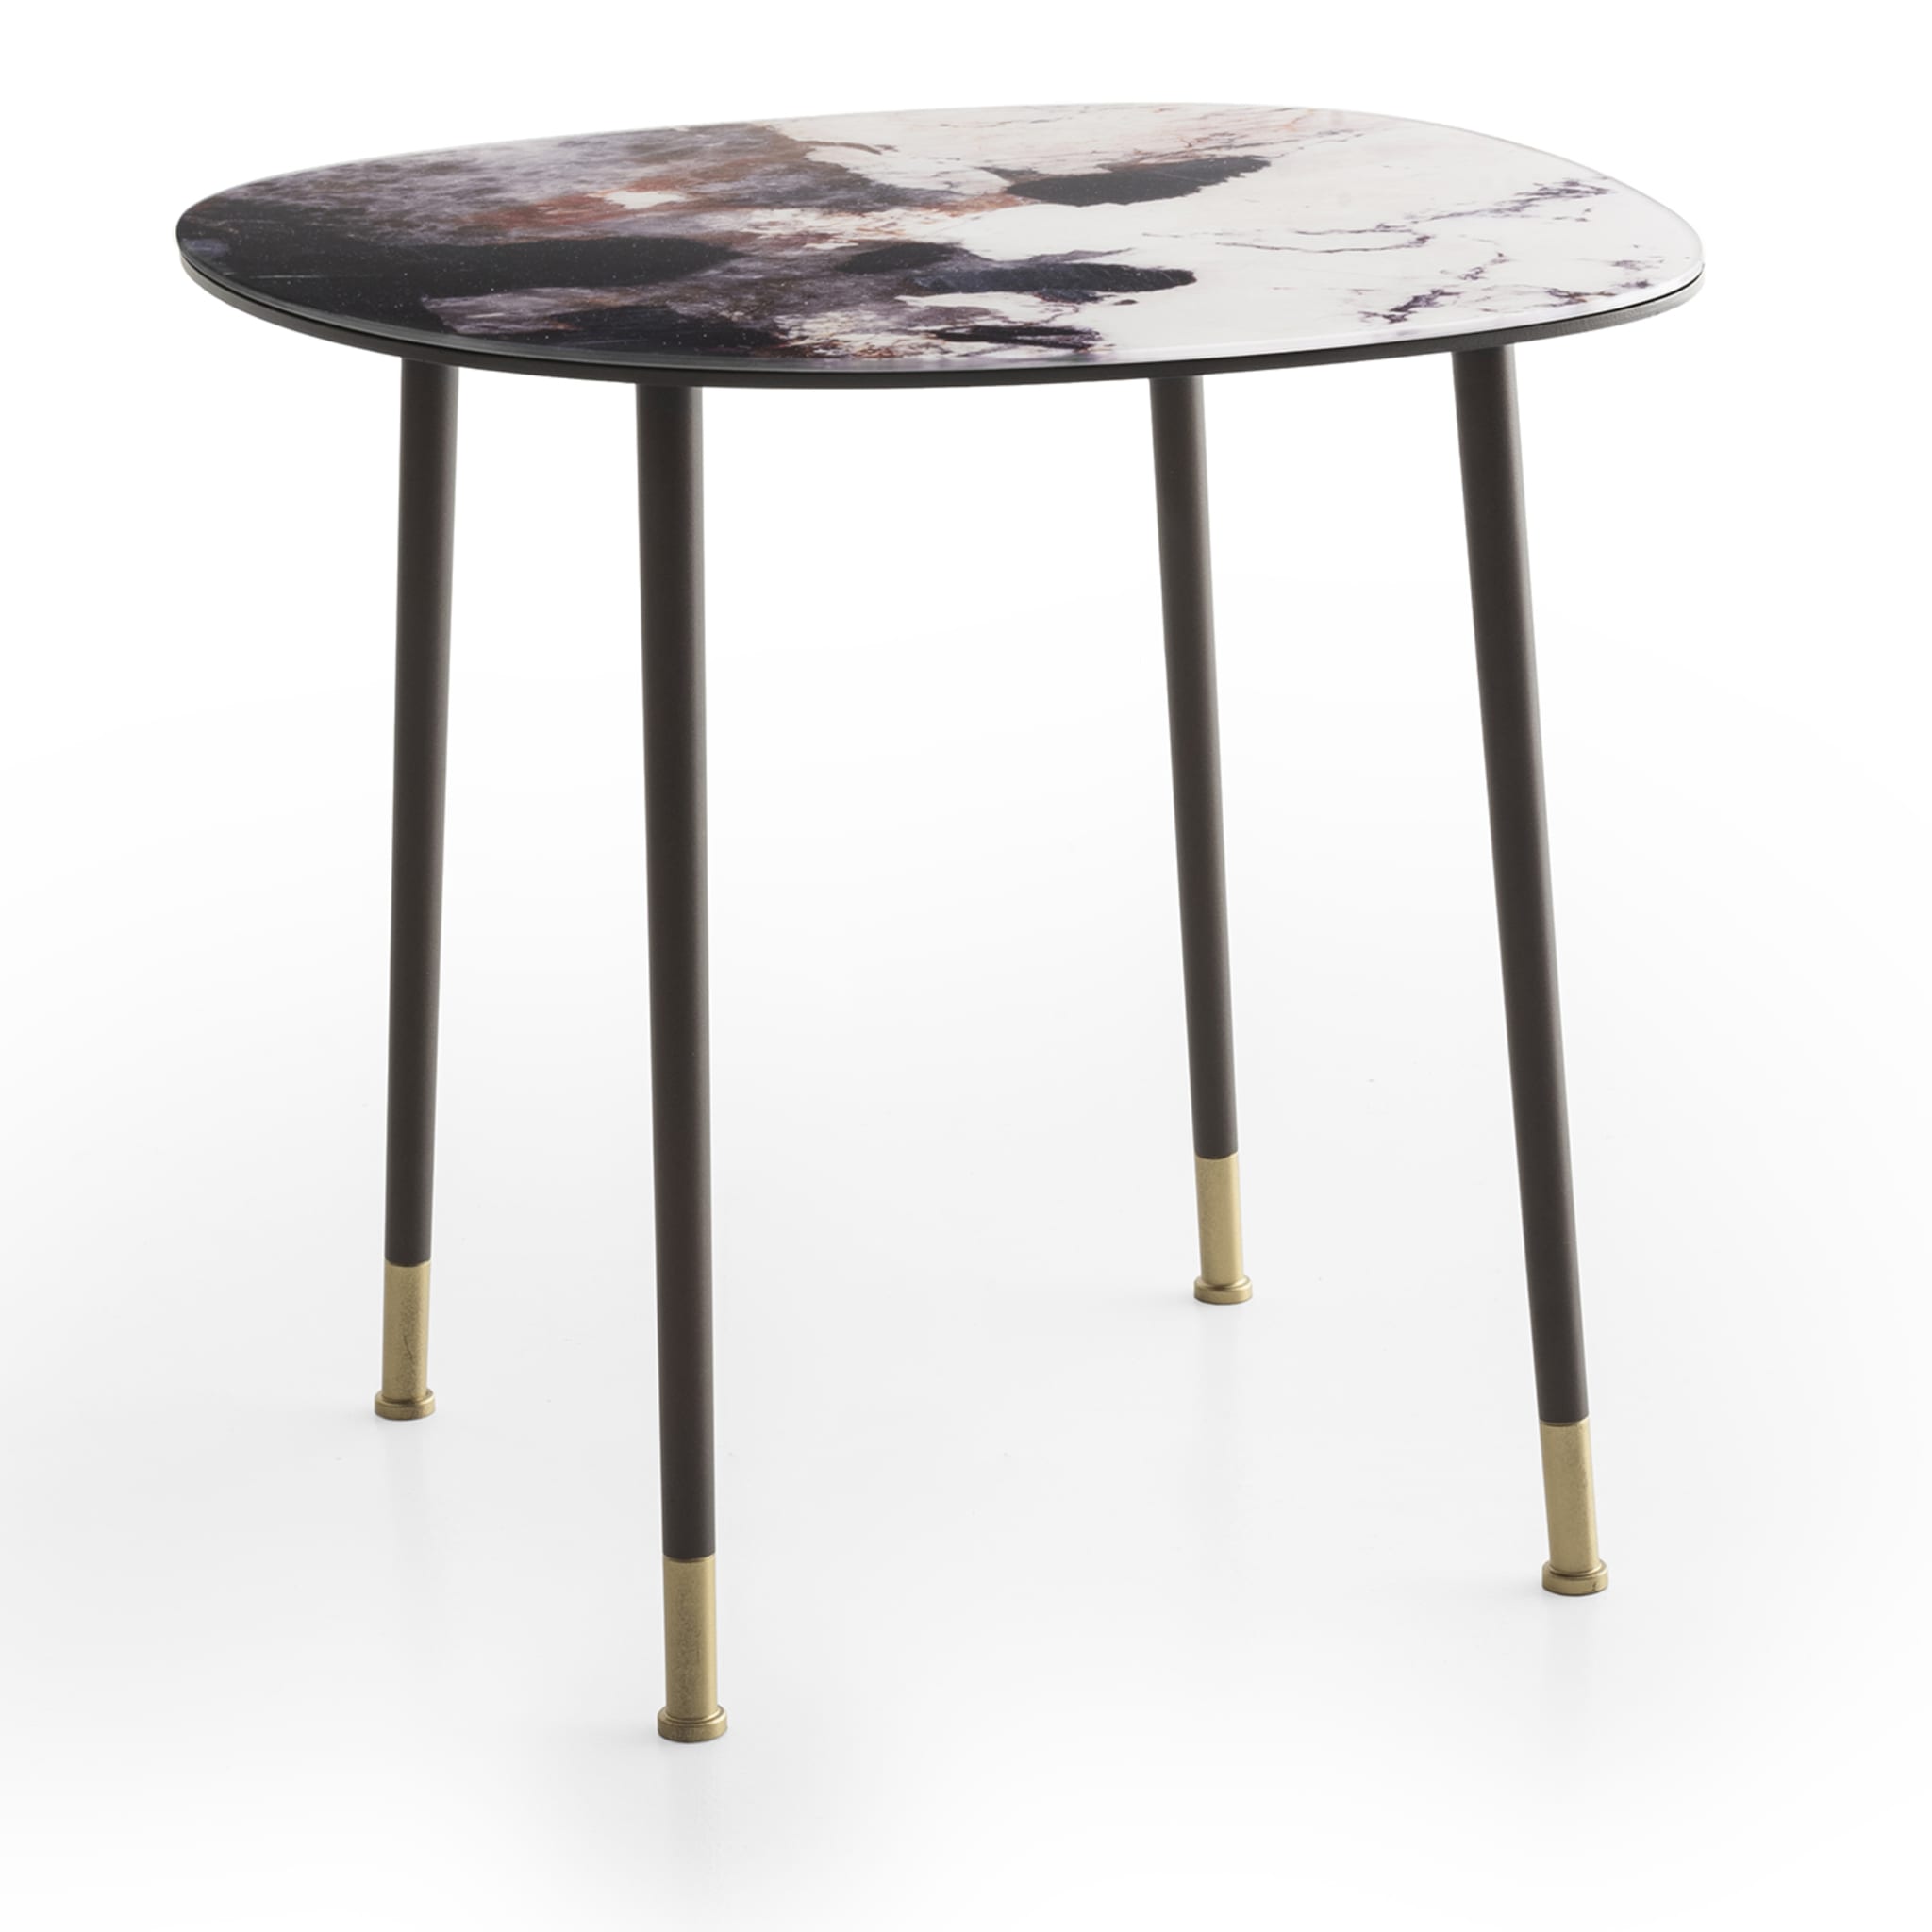 Pebble Small Patagonia Marble-Effect Coffee Table - Alternative view 1